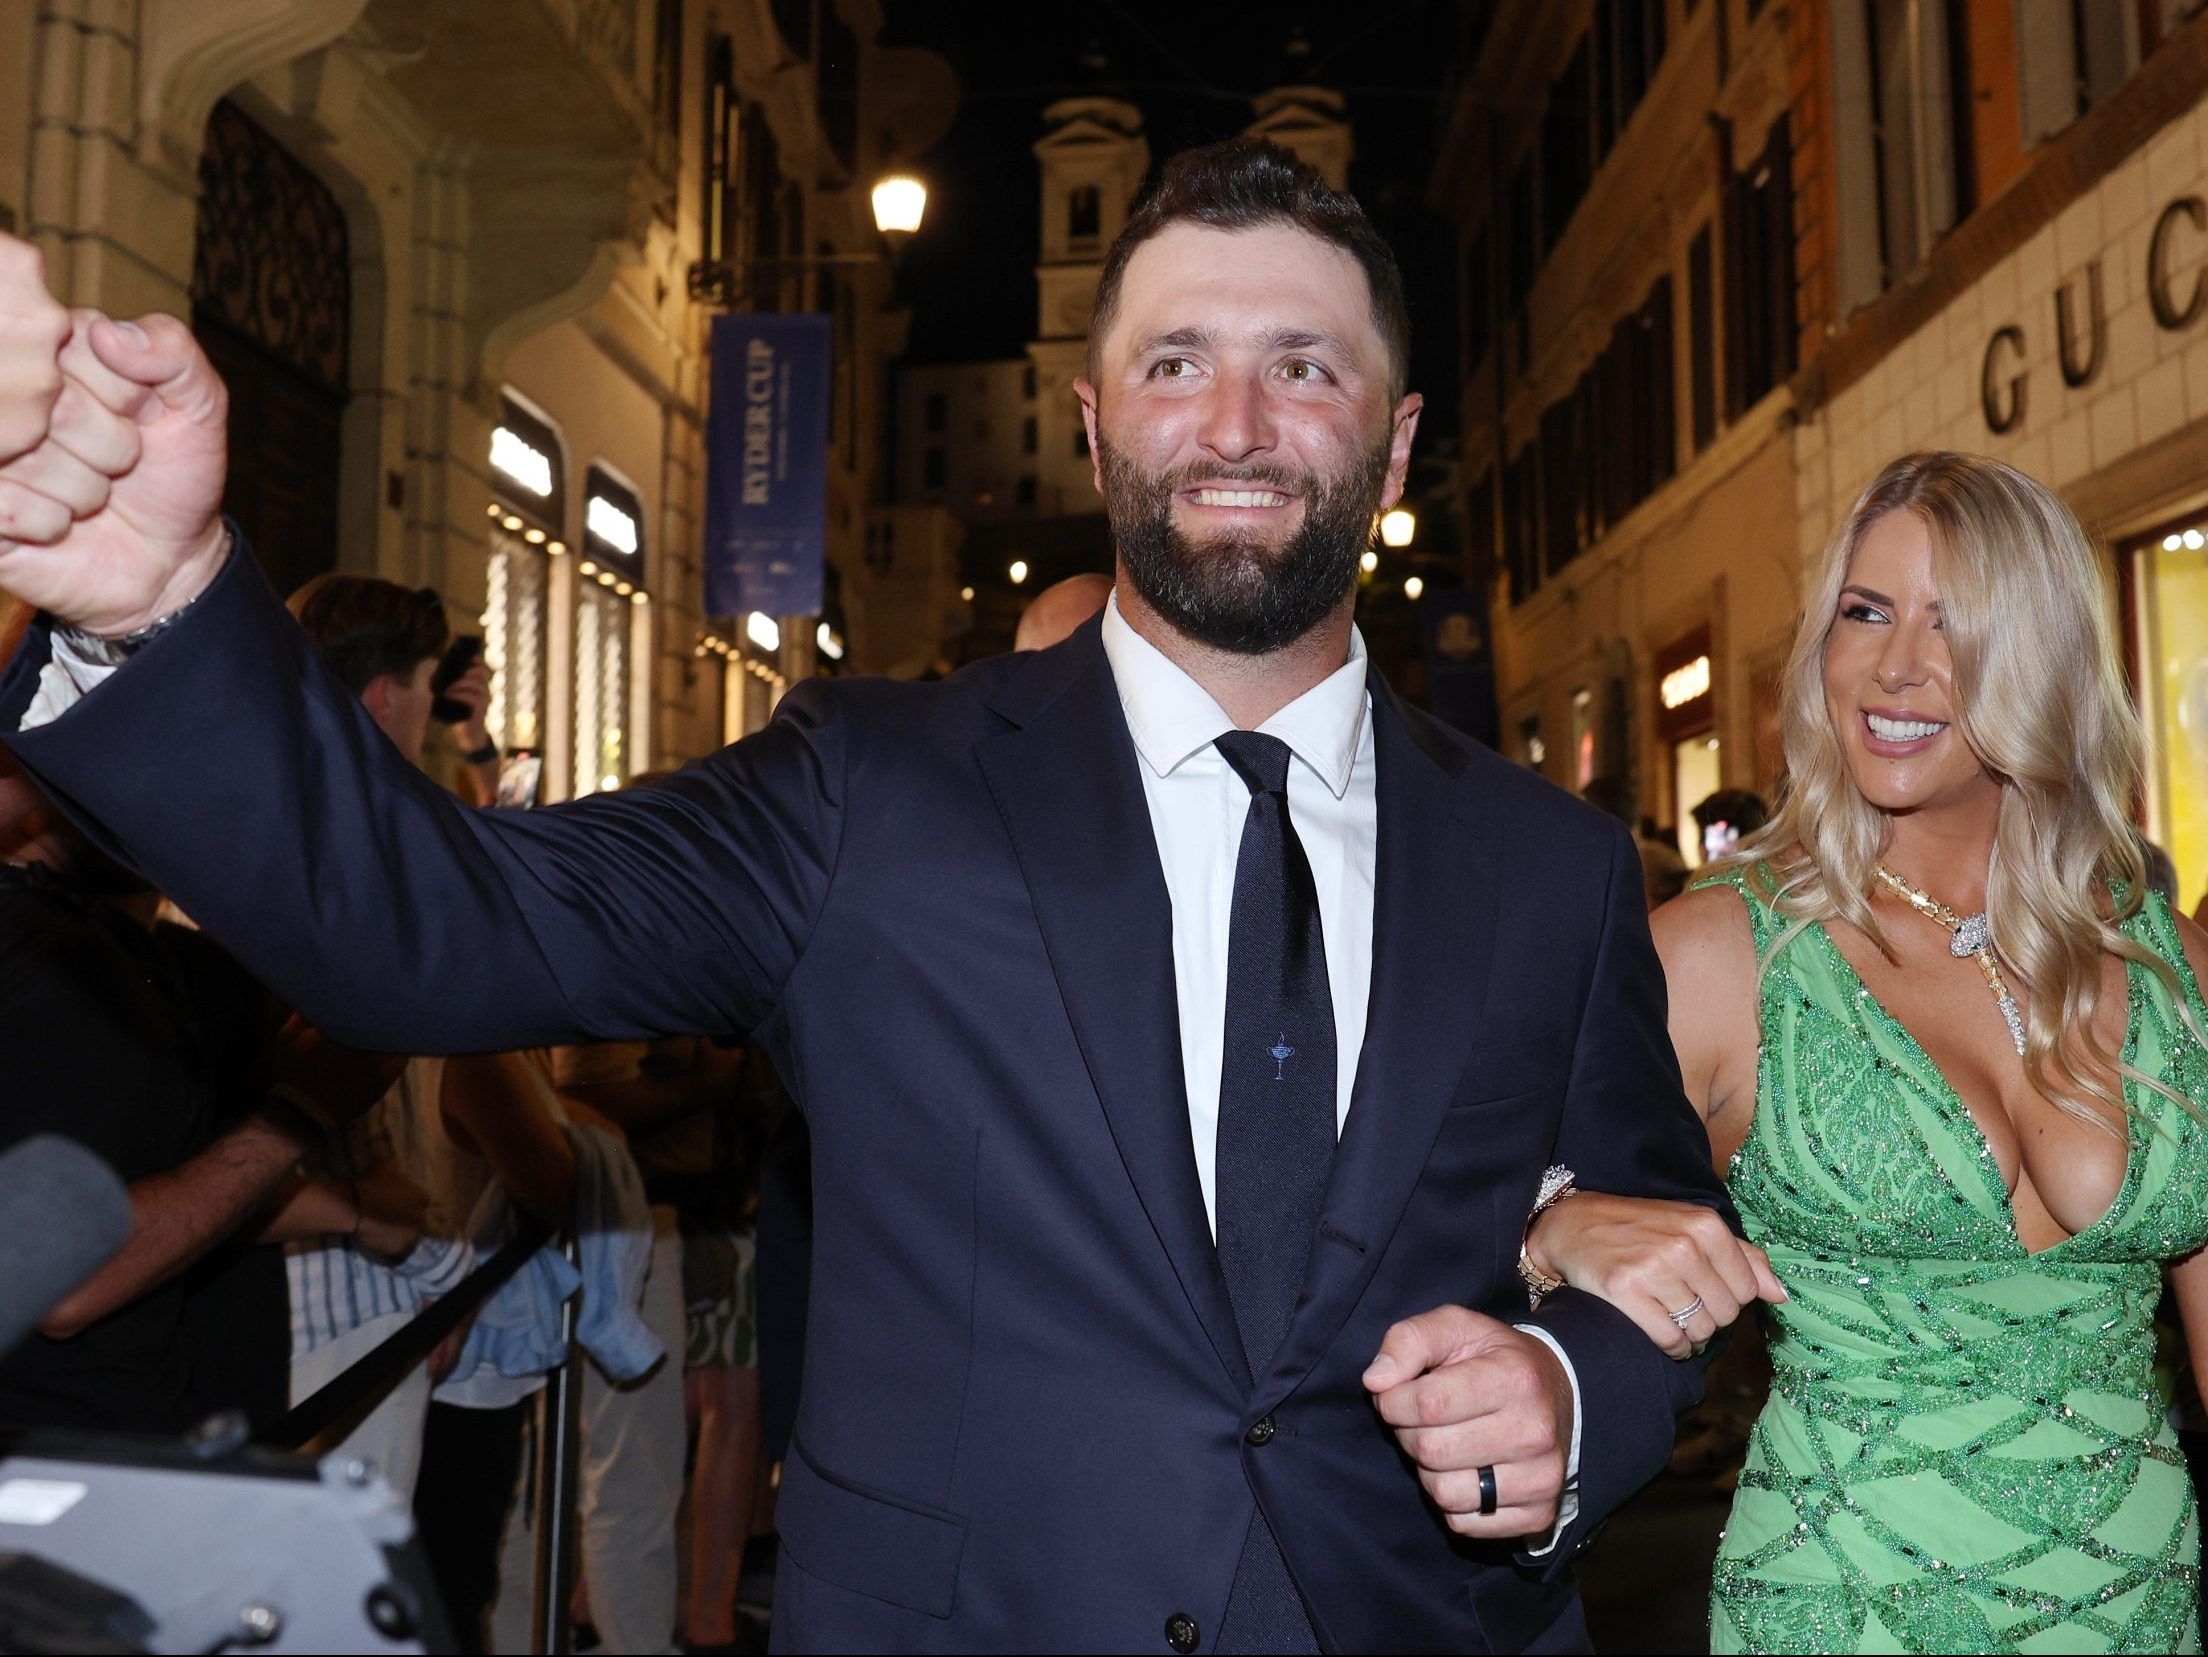 Ryder Cup couples looking good at gala Toronto image image